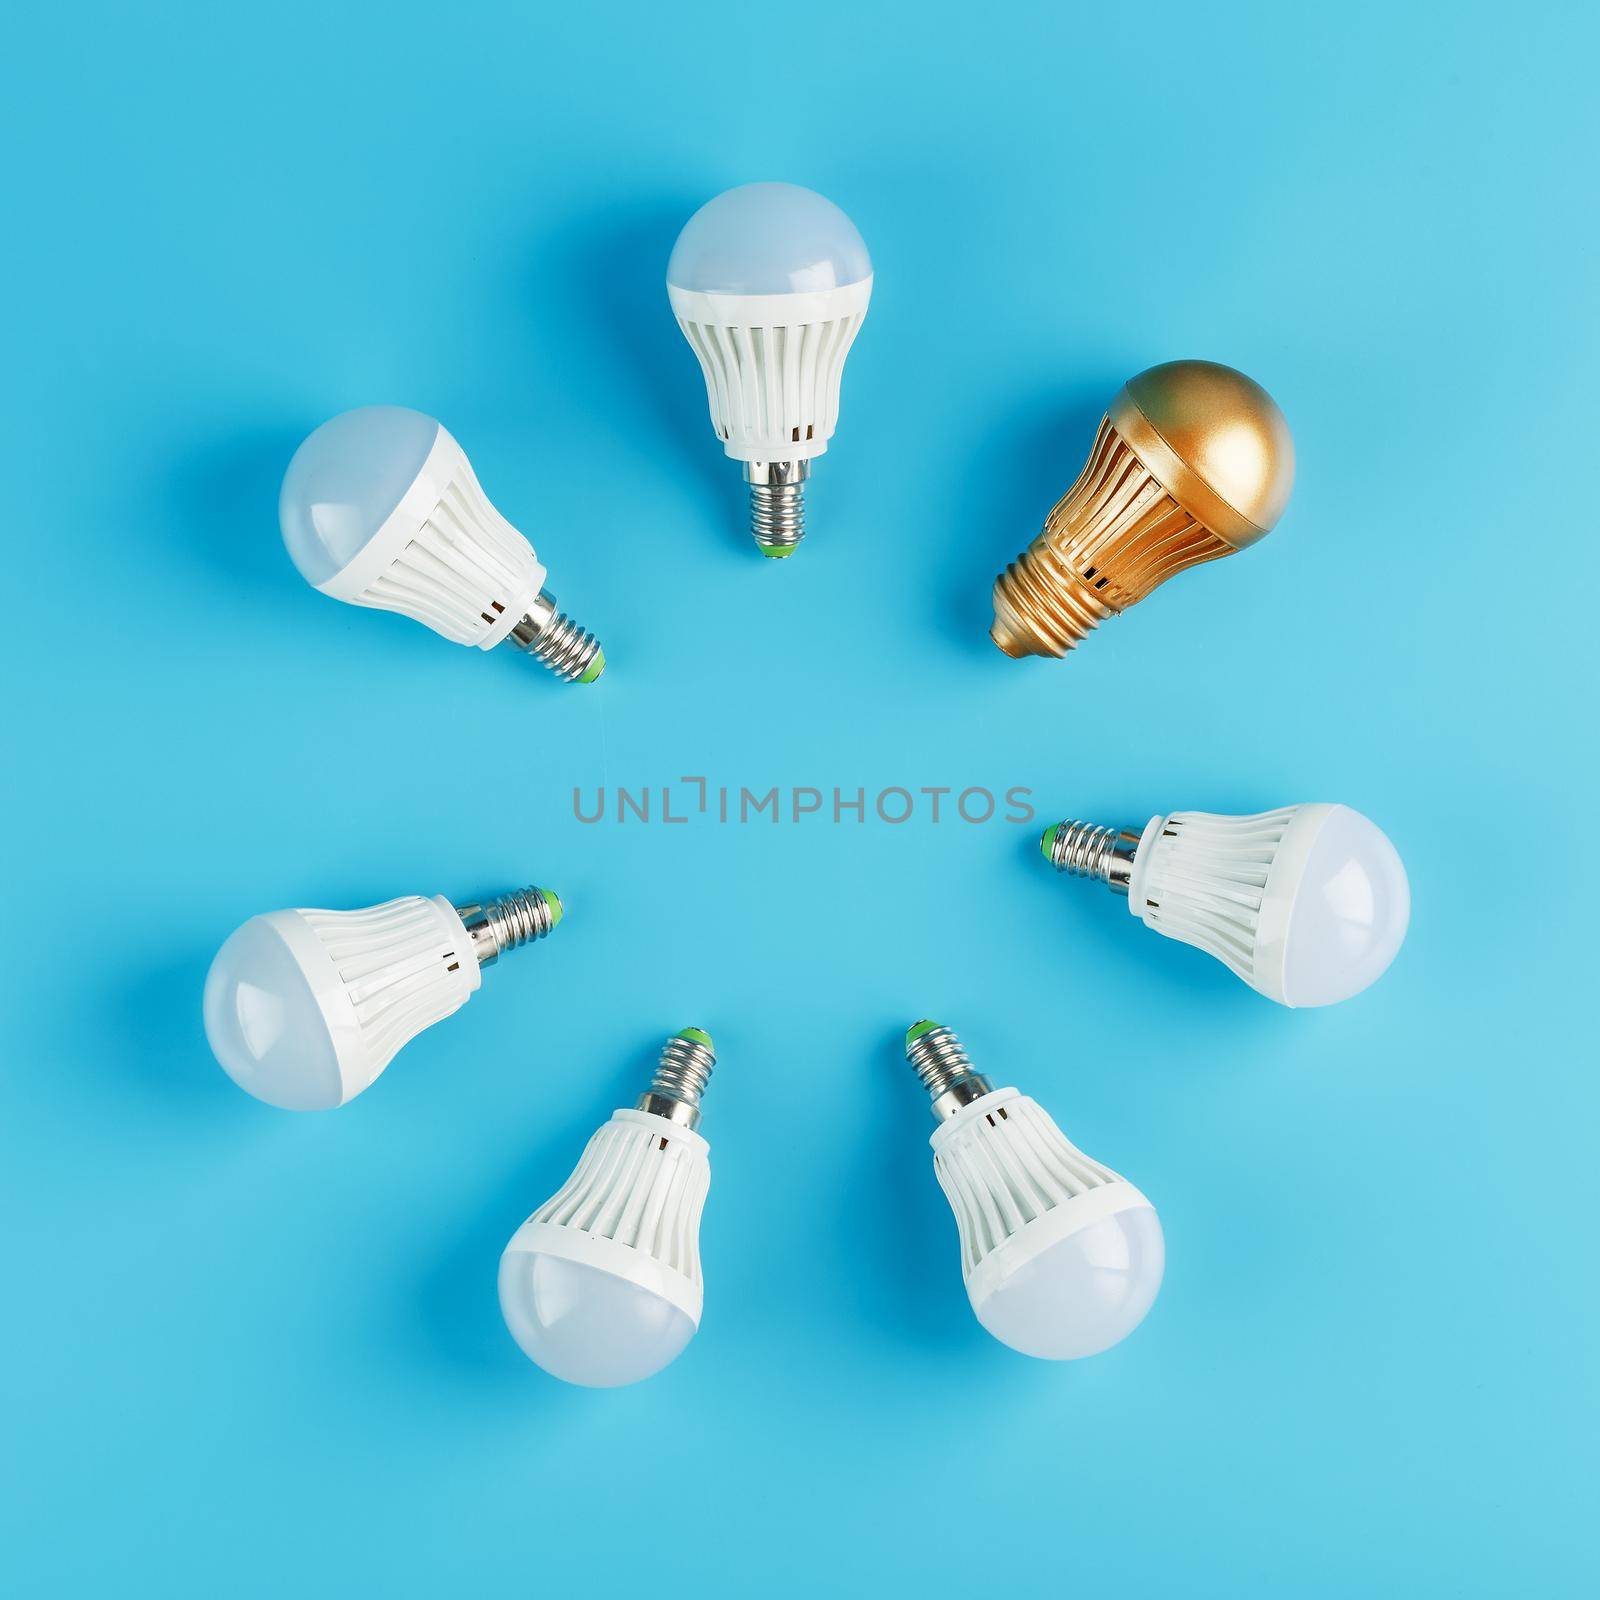 A Golden light bulb stands out in the circle of light bulbs of a ring of white lamps on a blue background. by AlexGrec